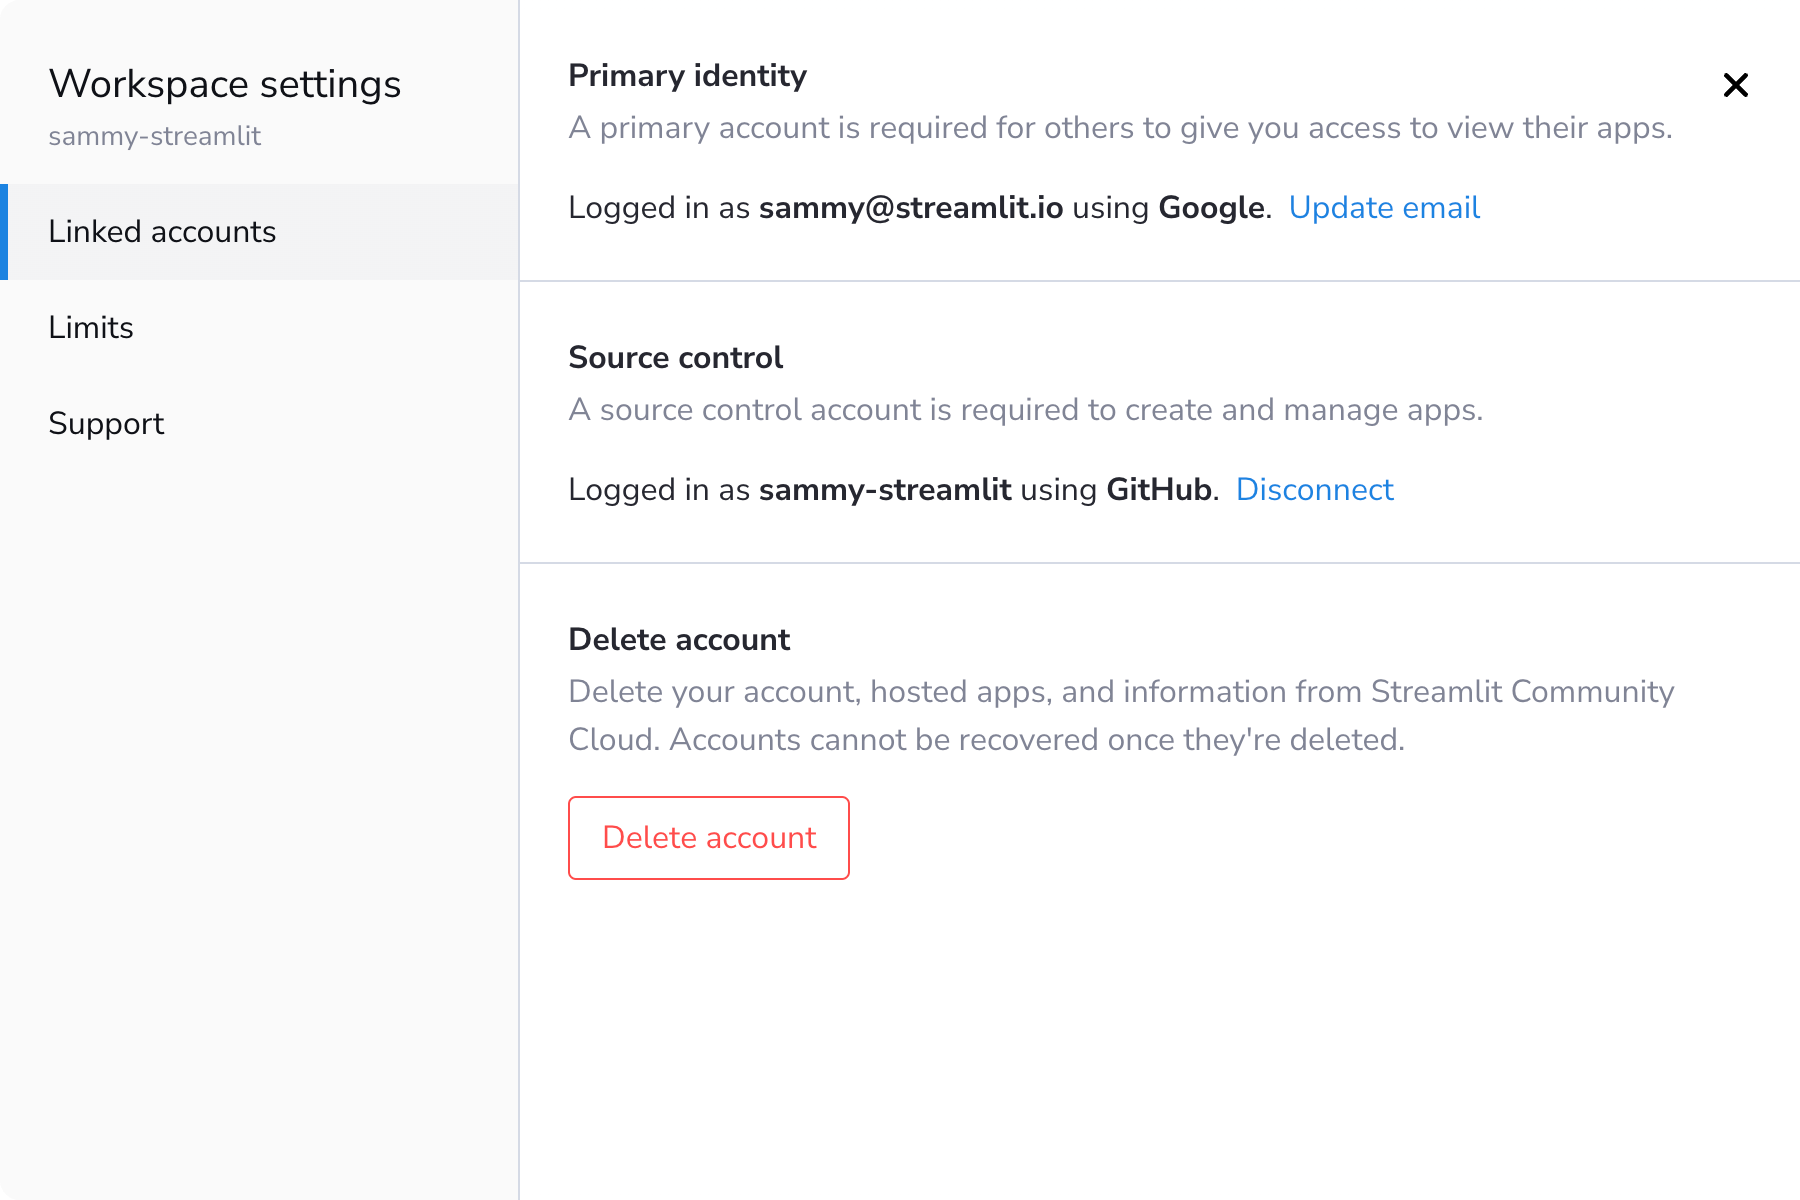 Manage your linked accounts in workspace settings